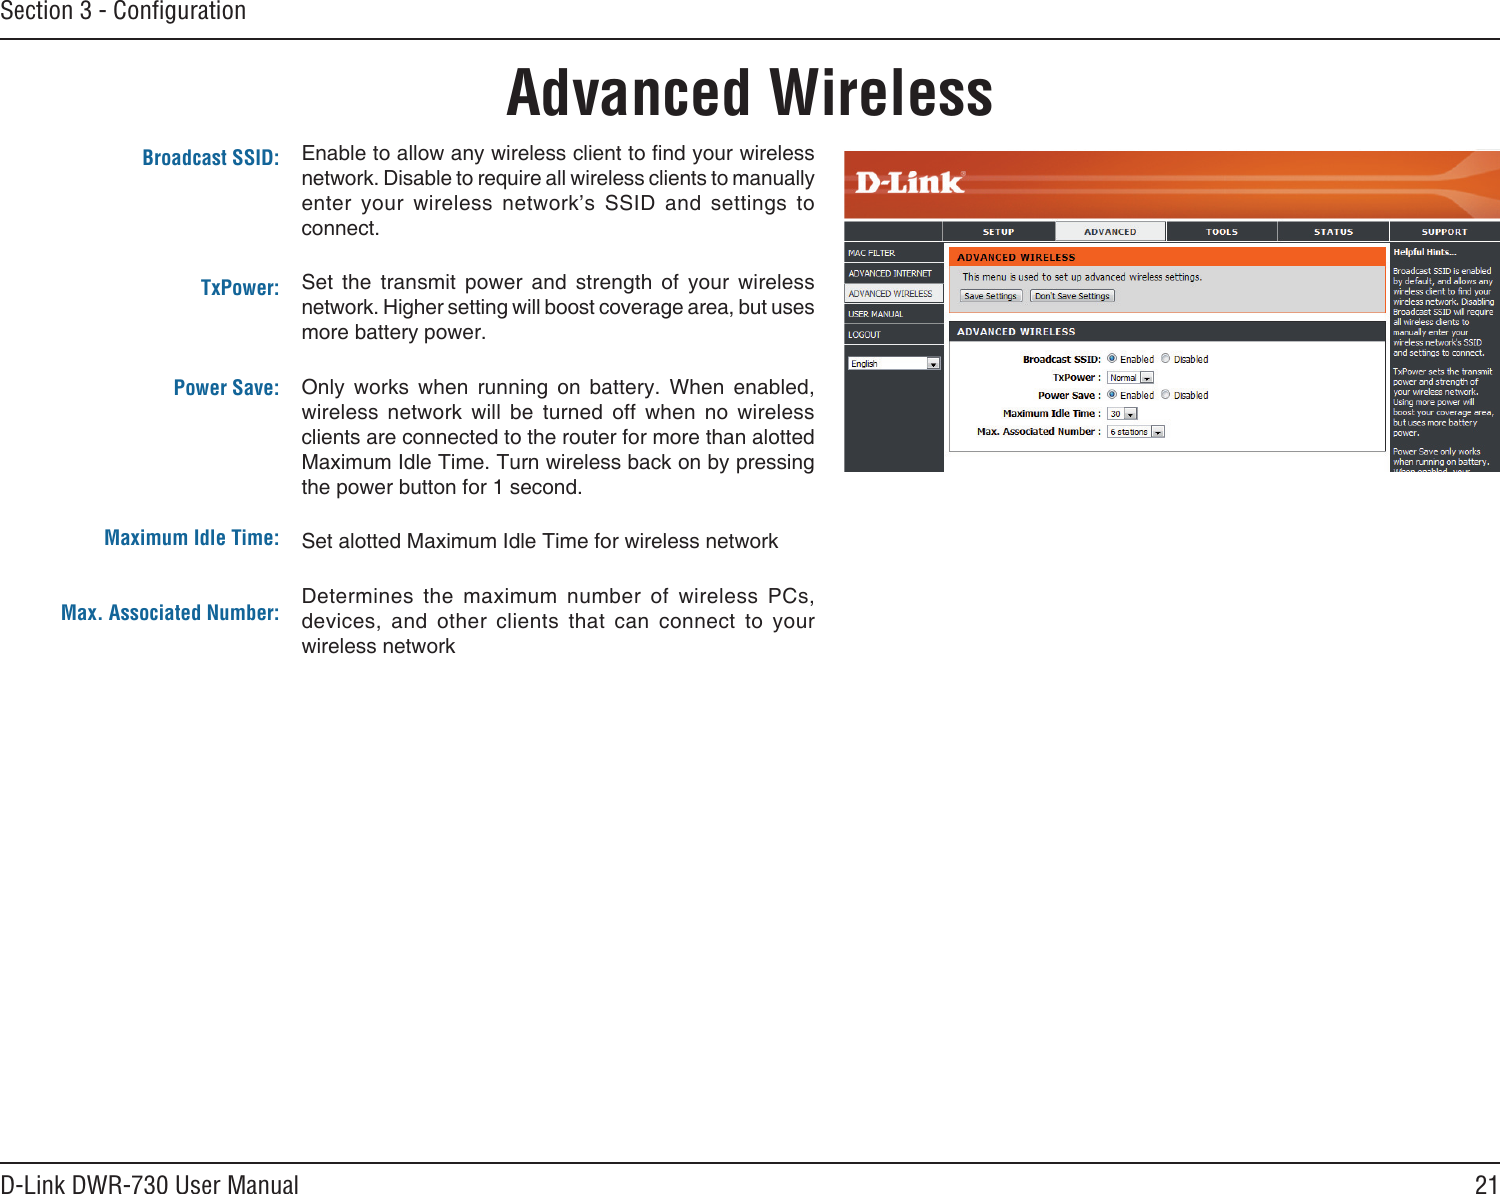 21D-Link DWR-730 User ManualSection 3 - ConﬁgurationAdvanced Wireless                                            Broadcast SSID:   TxPower:    Power Save:      Maximum Idle Time:   Max. Associated Number: